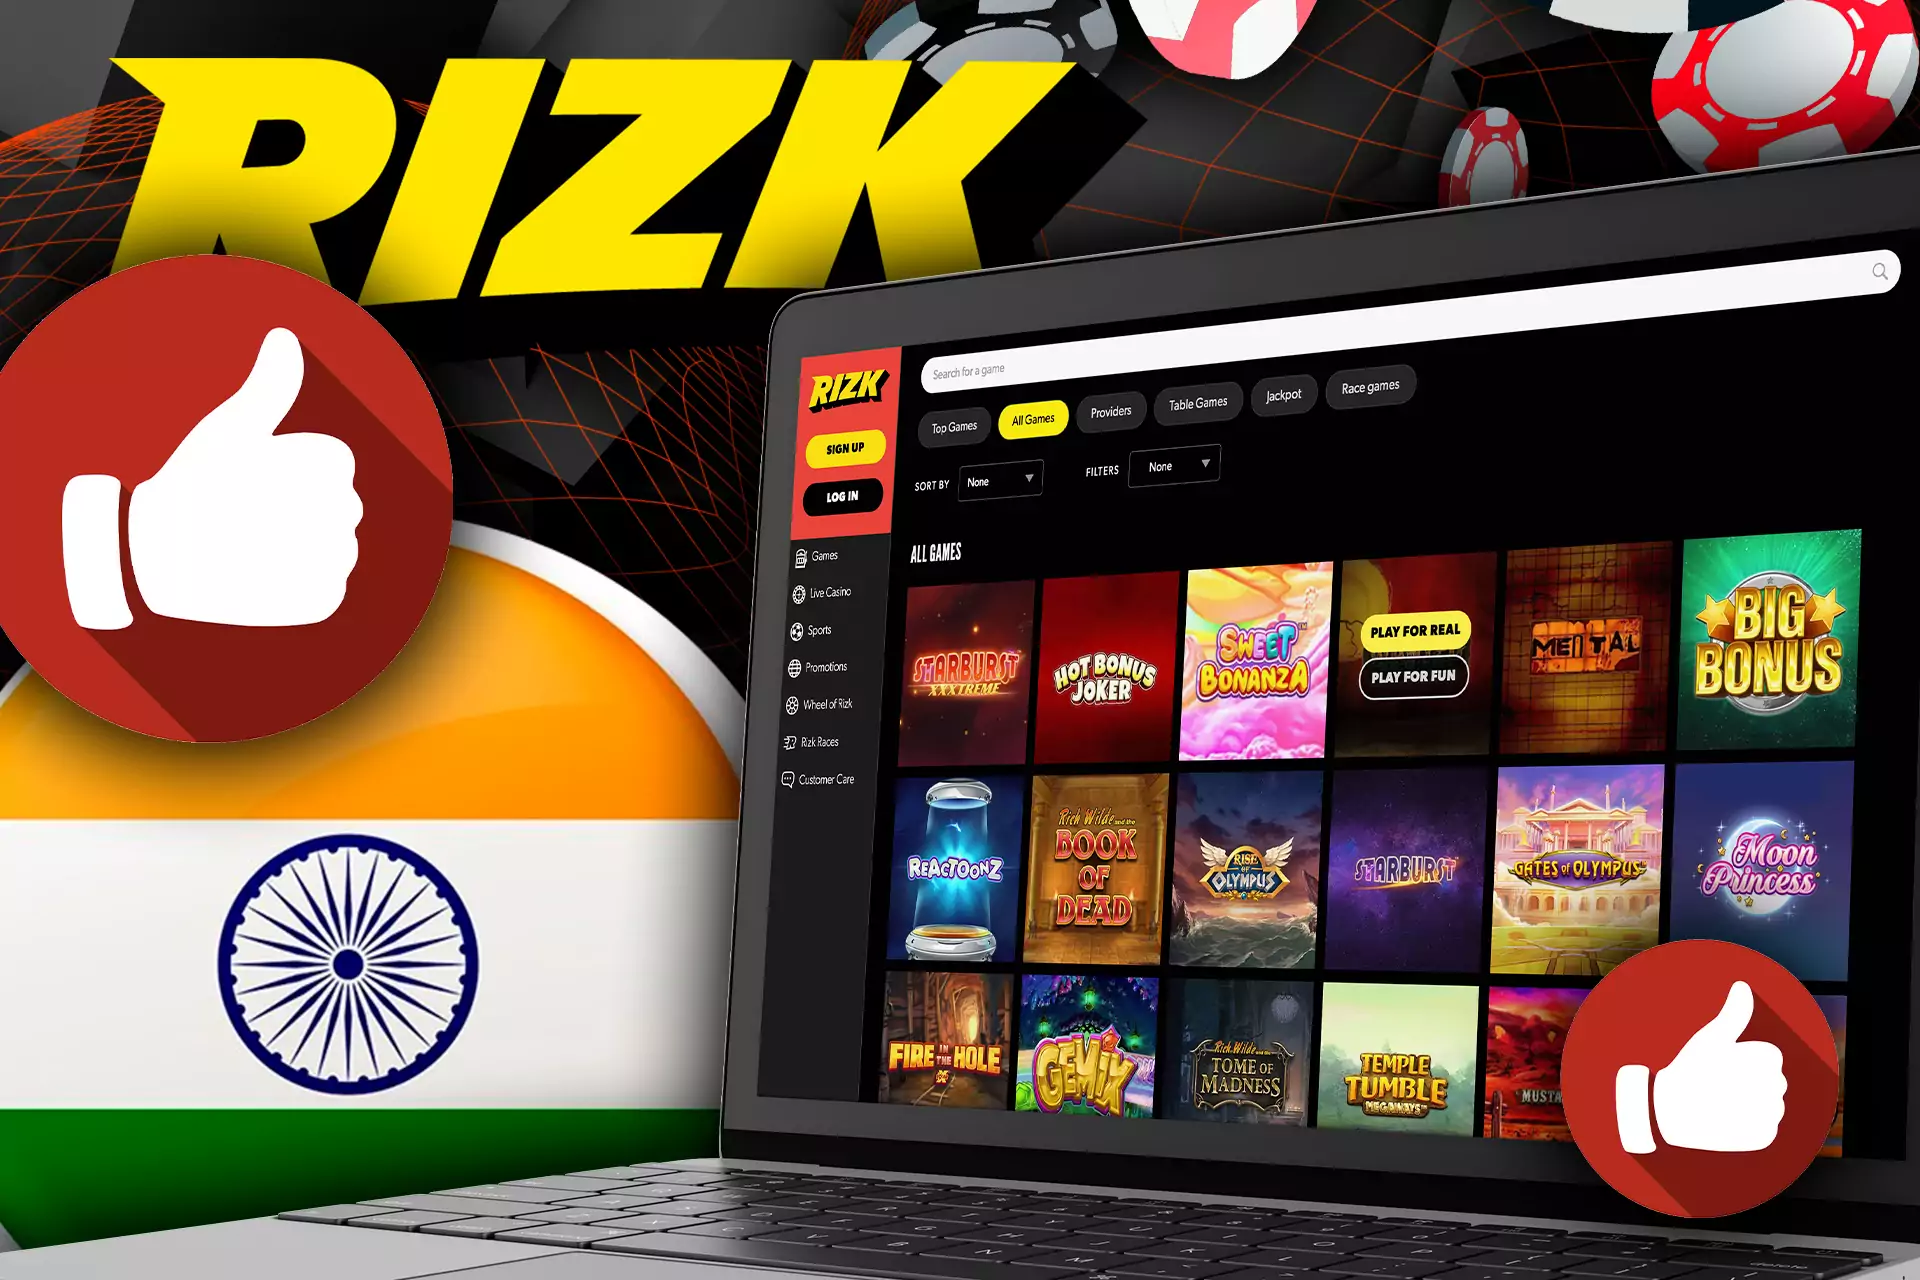 Indian users appreciate the stylish interface and design of the Rizk Casino site, variety of games and payment options.